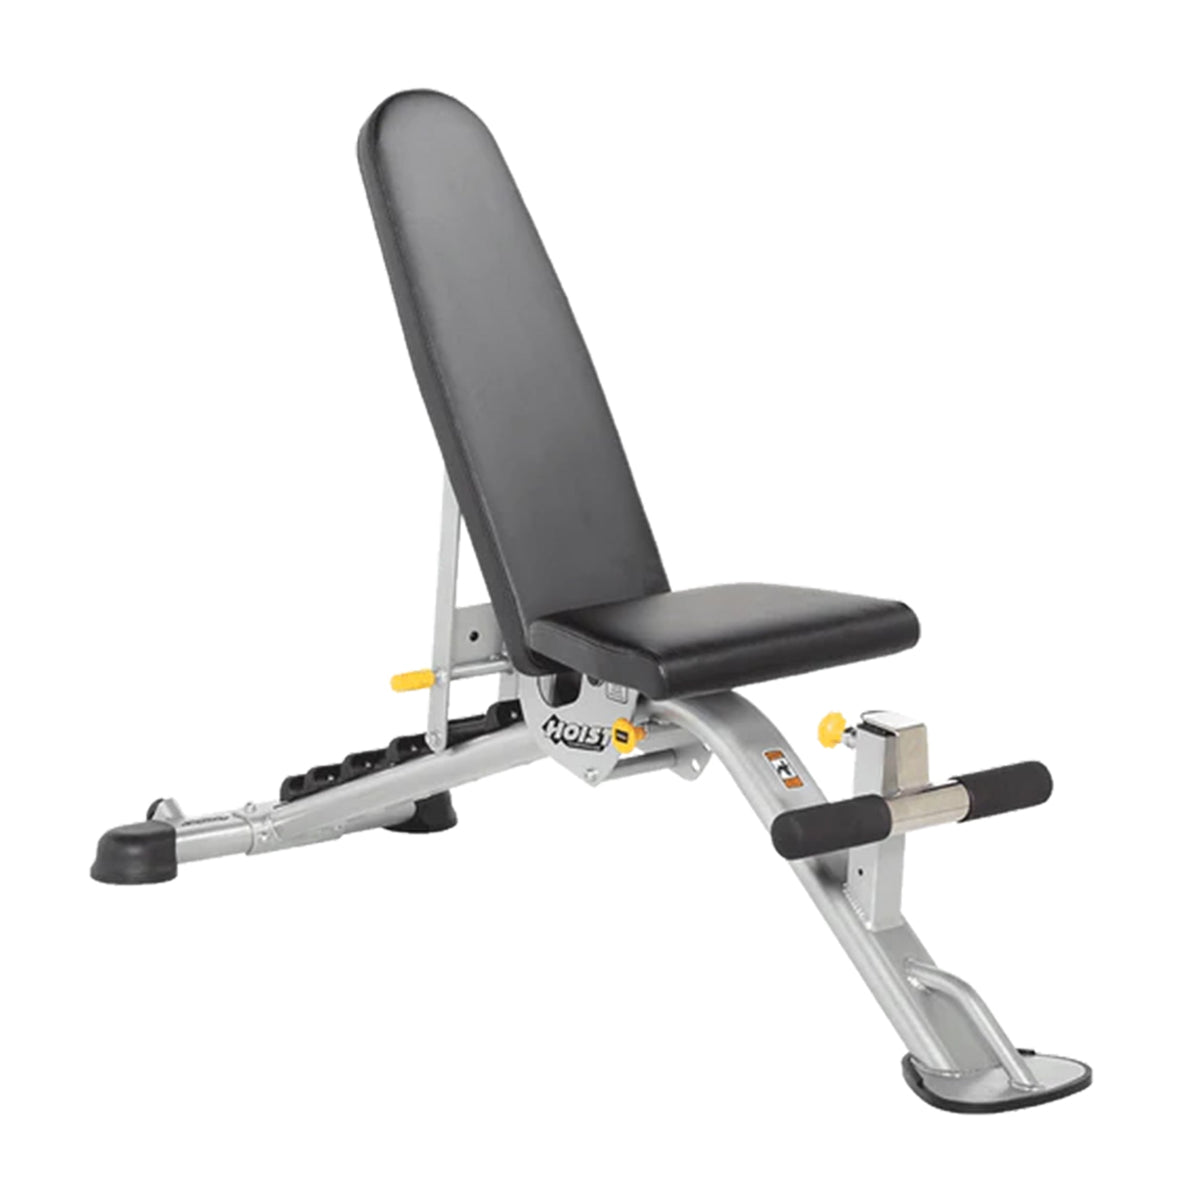 Hoist Fitness HF-5165 7 Position FID Bench full view | Fitness Experience